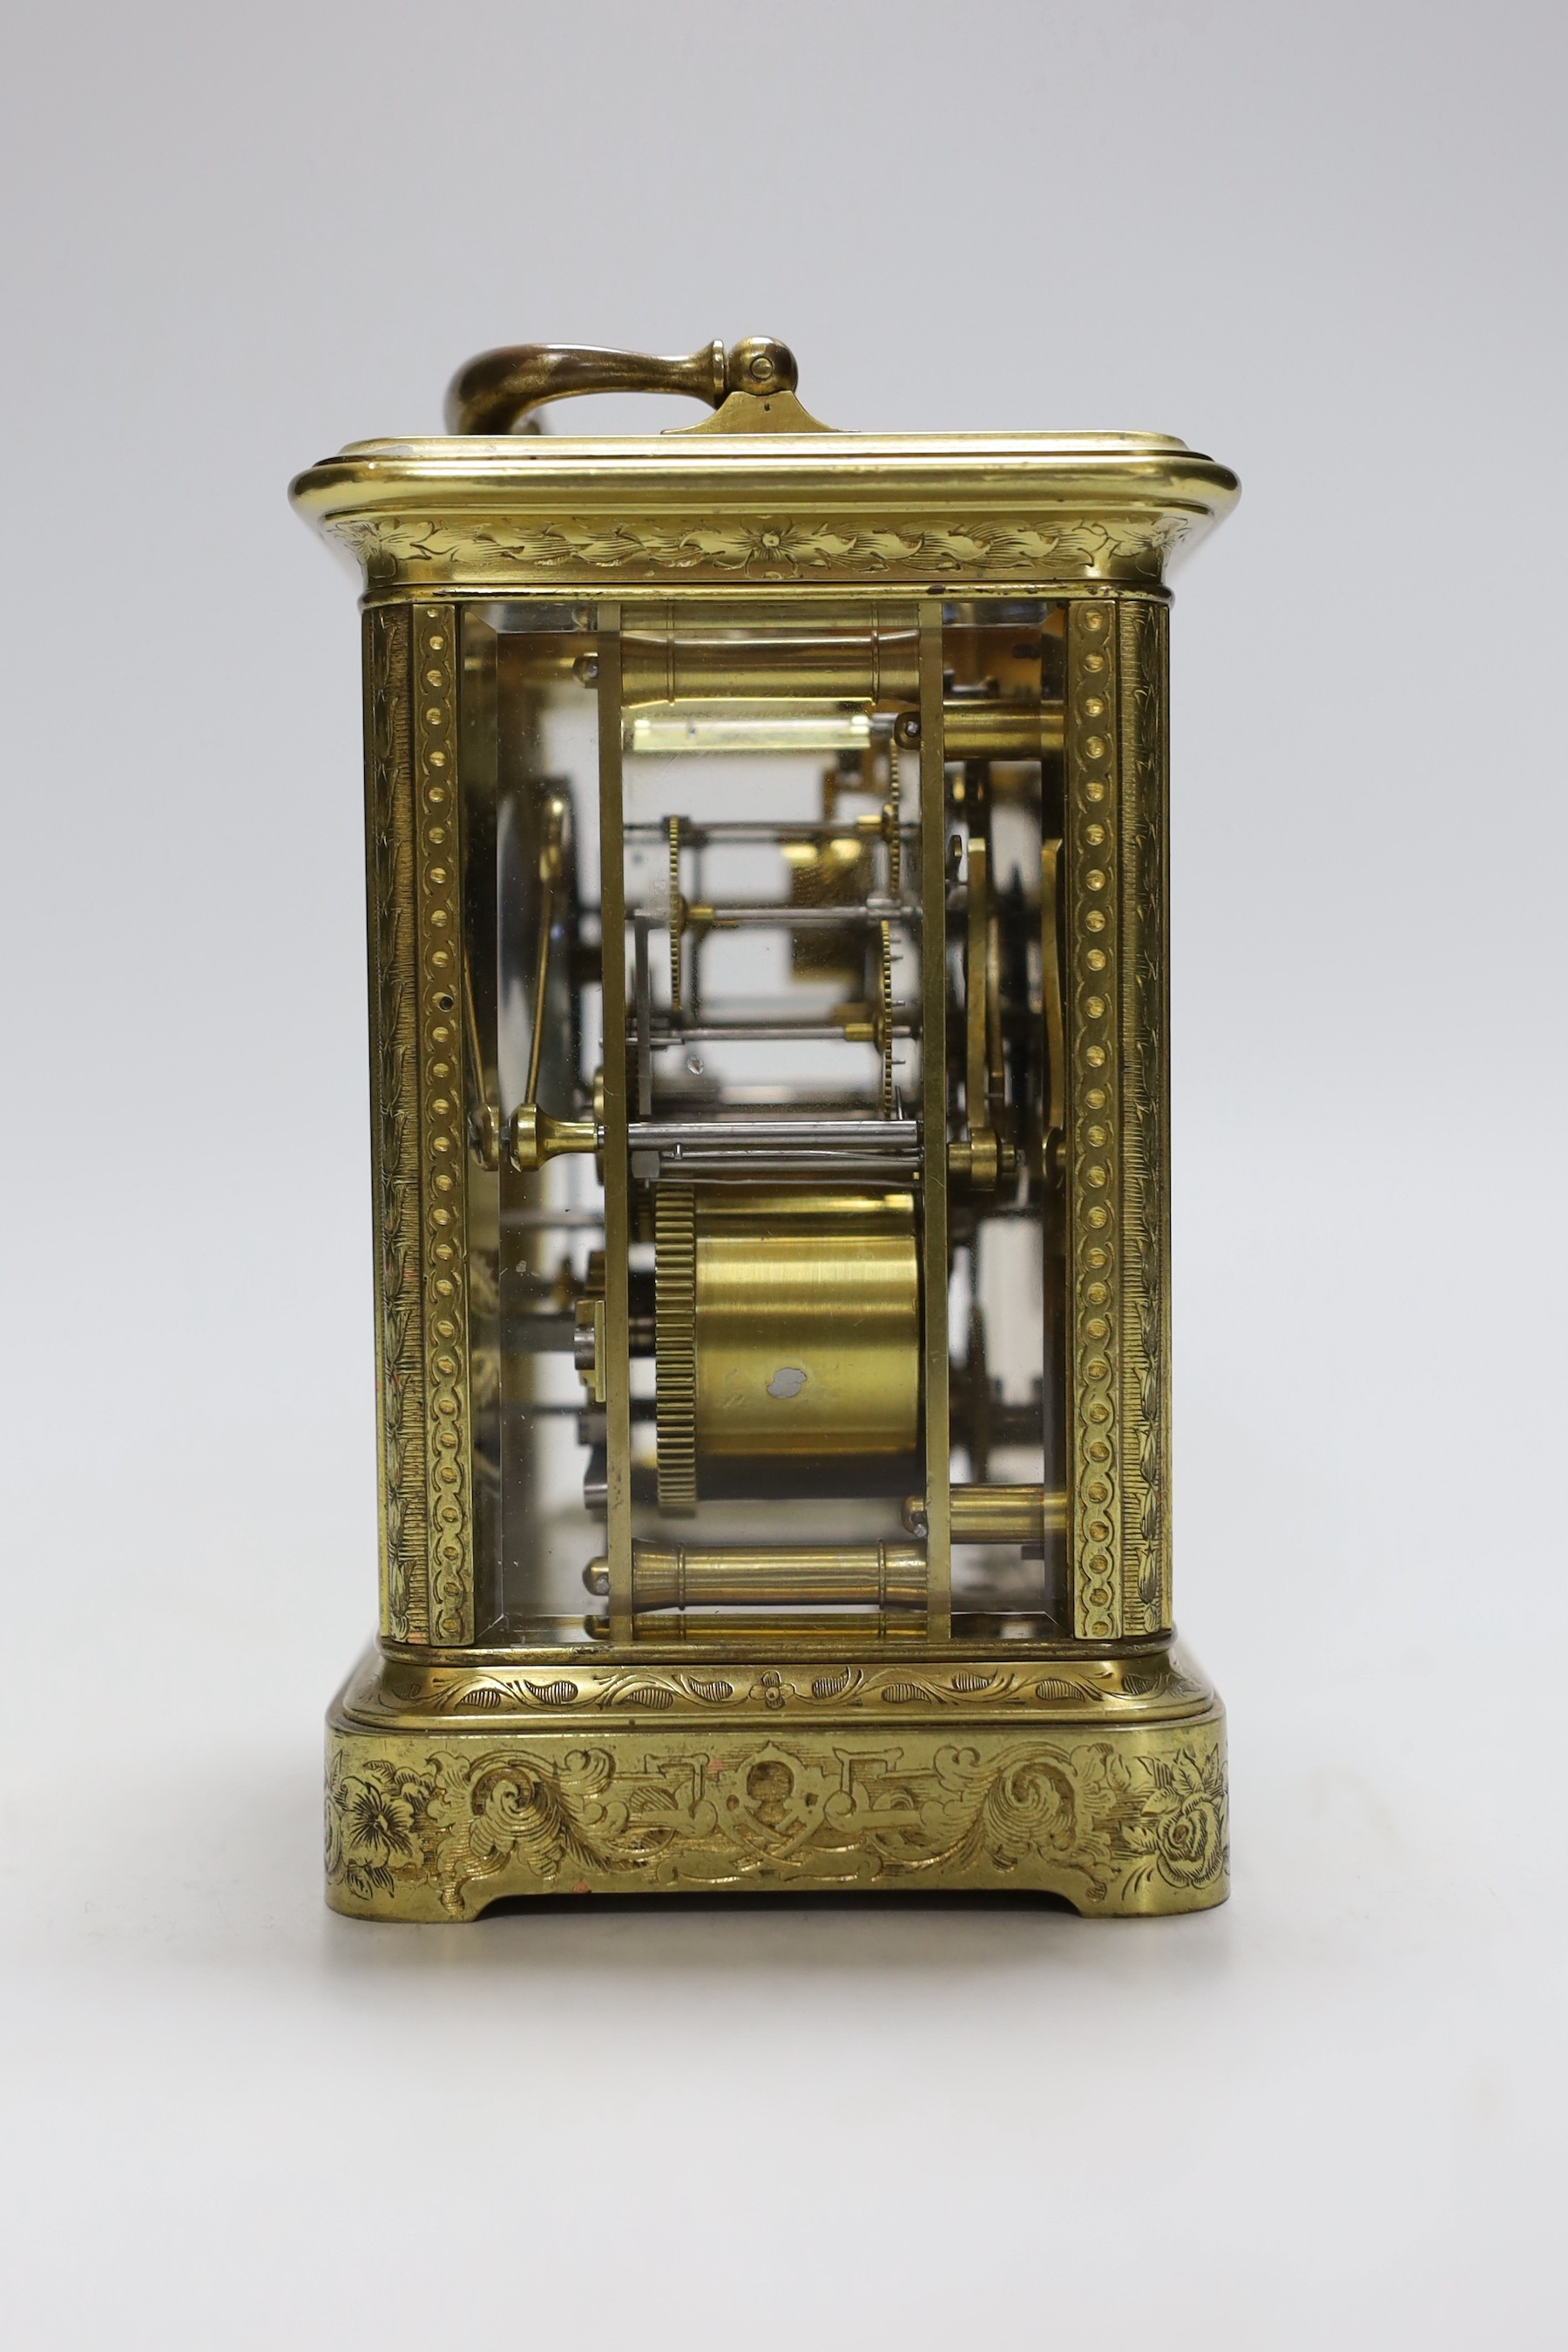 A late 19th century French engraved brass repeating carriage clock with alarm, signed Mottu Freres, Paris, 13cm high